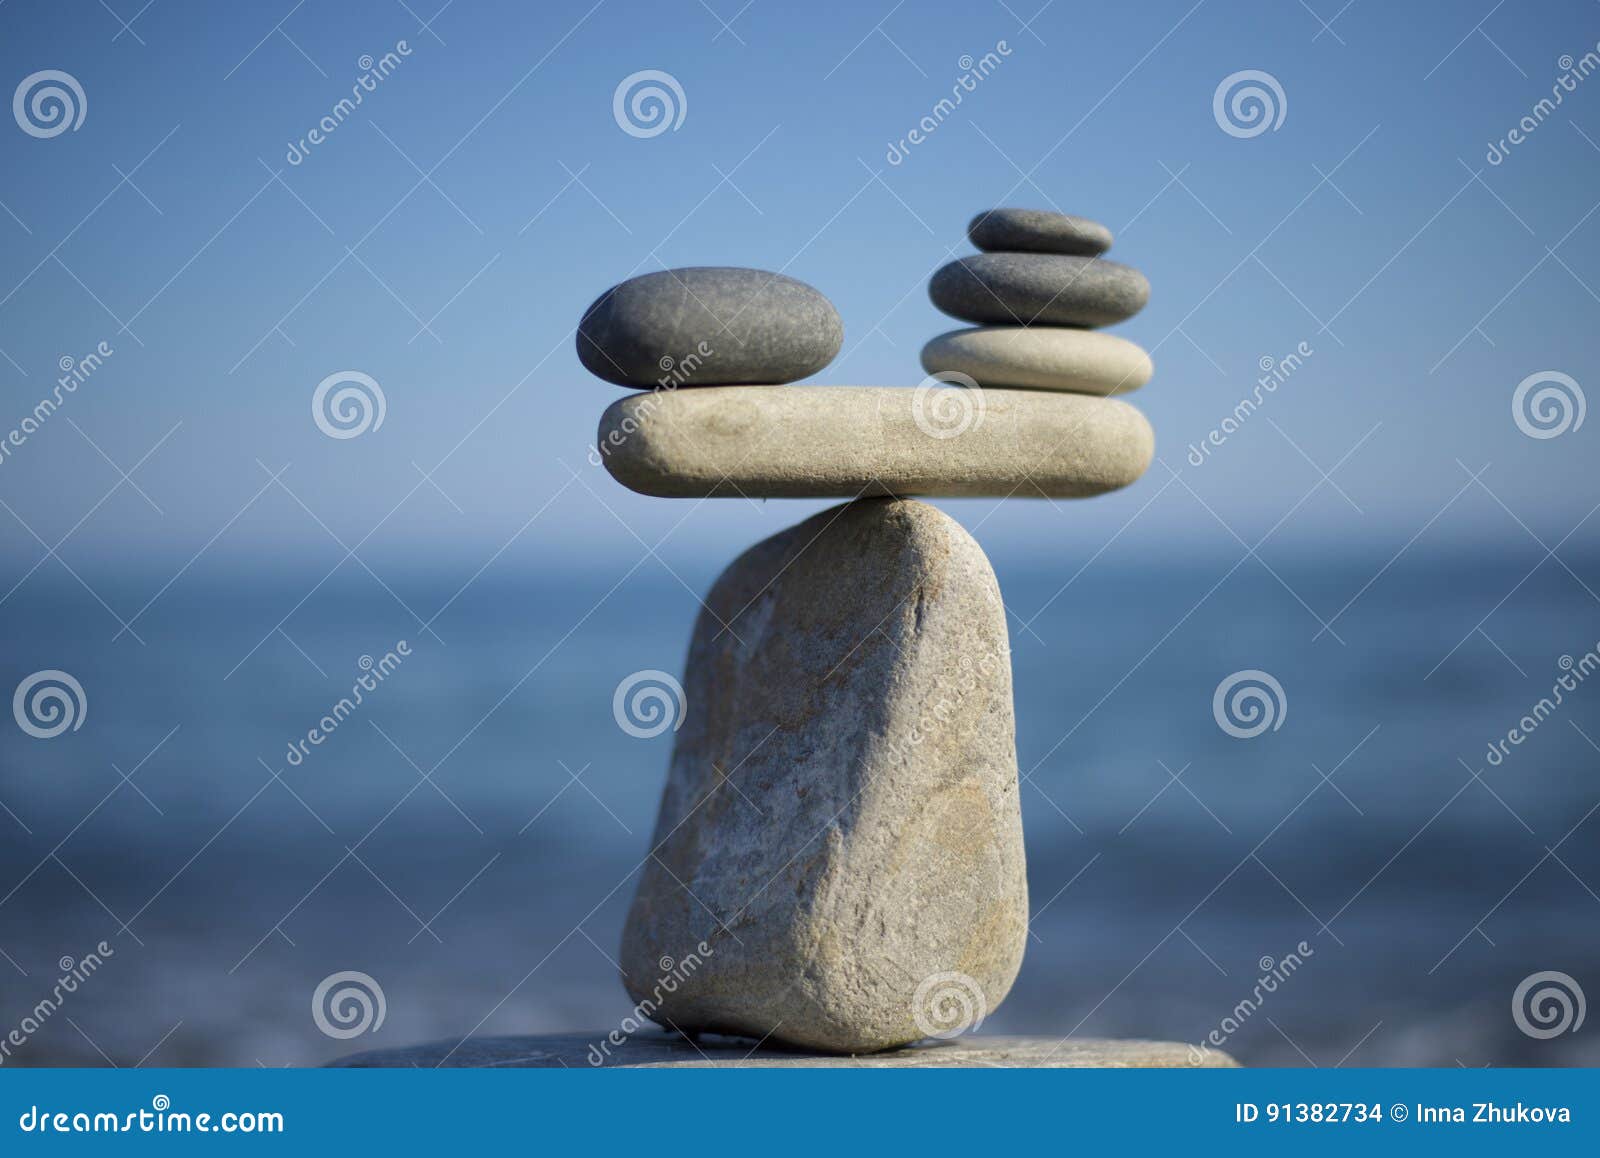 stones pile background. scales balance. balanced stones on the top of boulder. decide problem. to weight pros and cons.